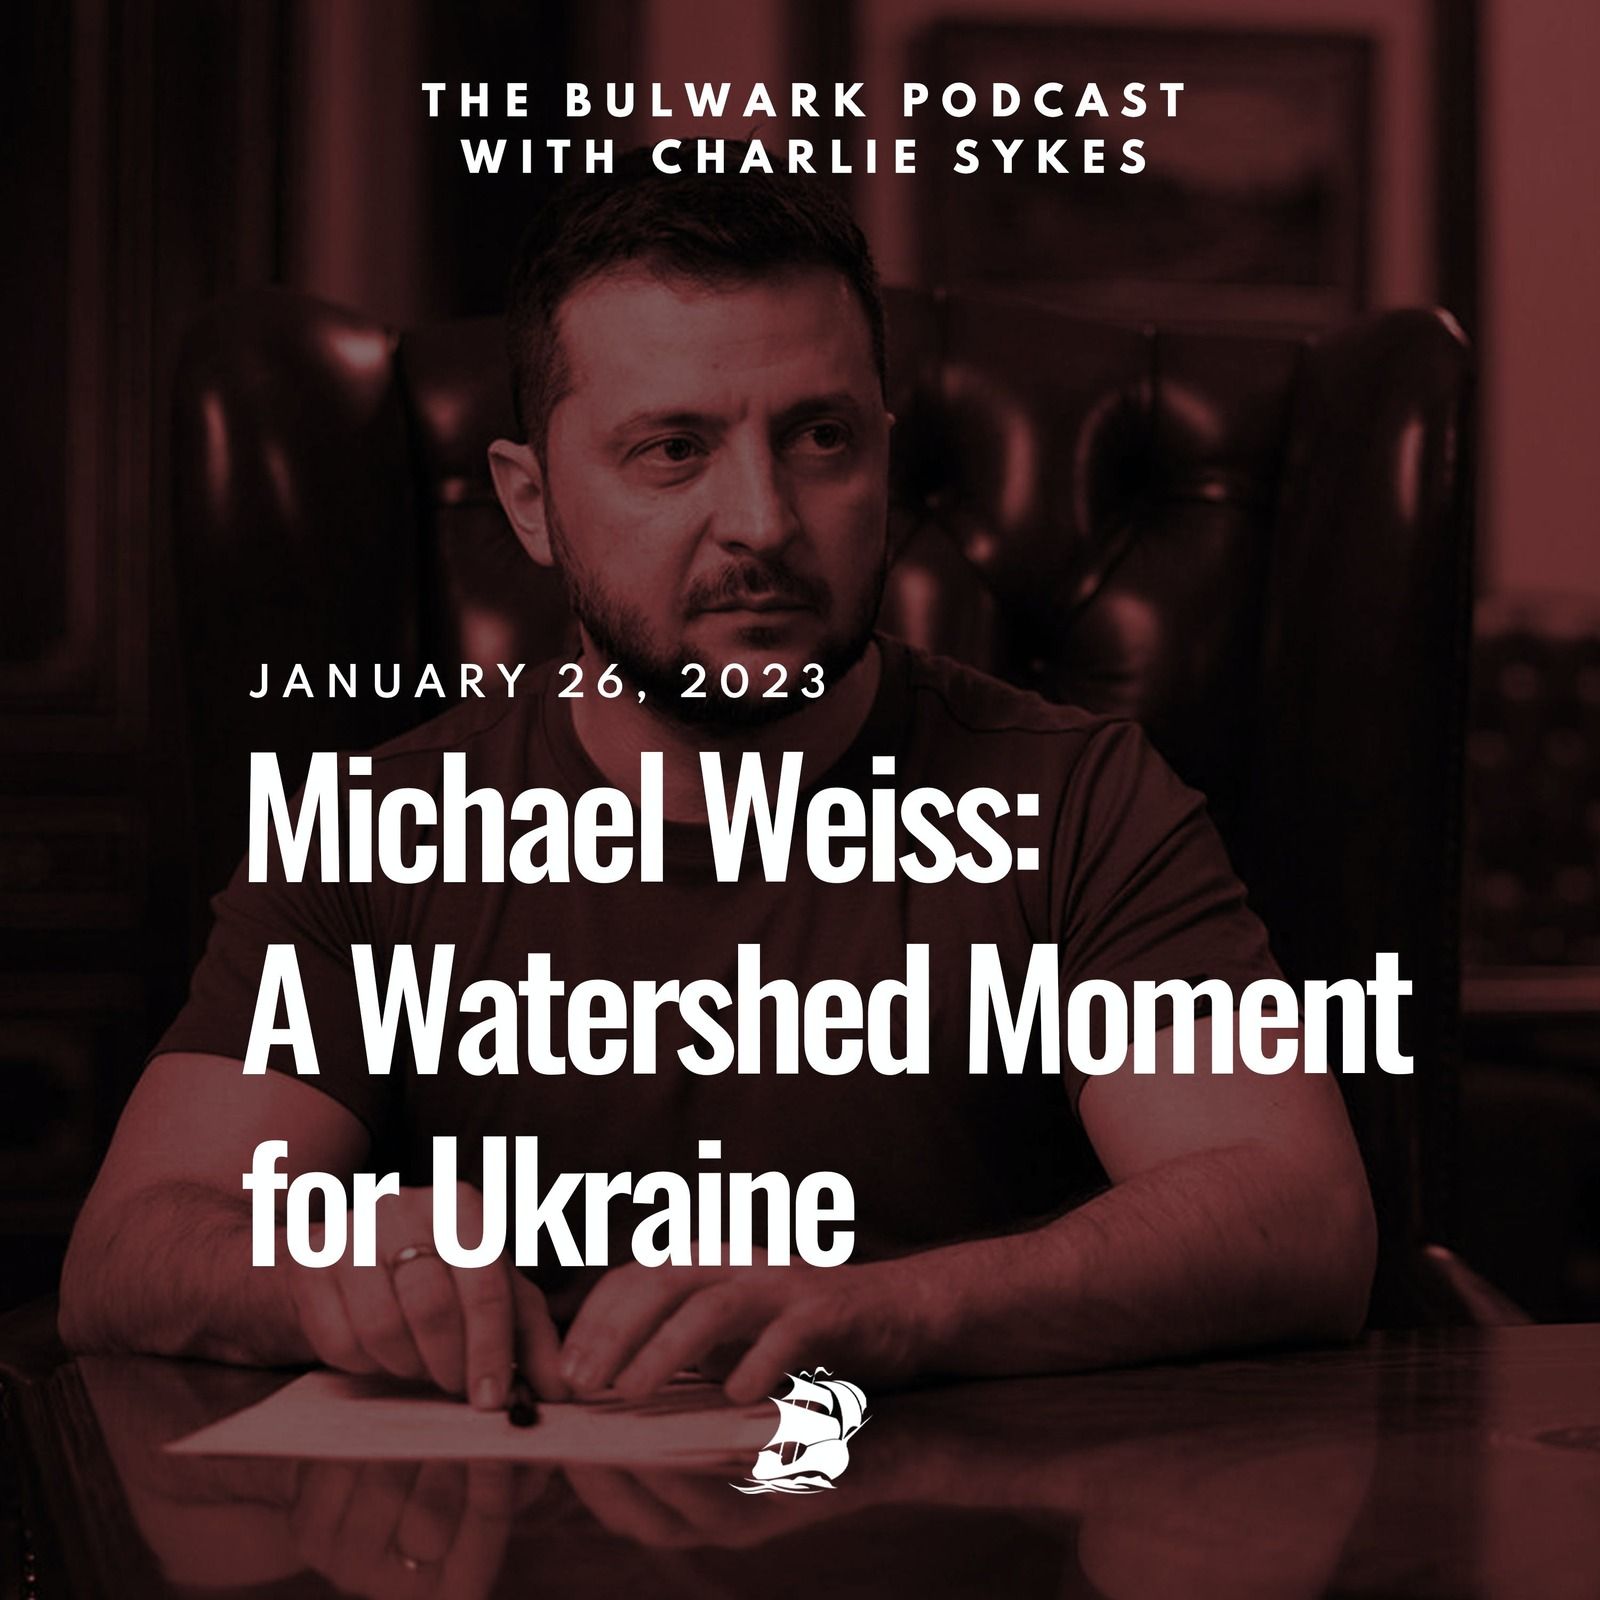 Michael Weiss: A Watershed Moment for Ukraine by The Bulwark Podcast